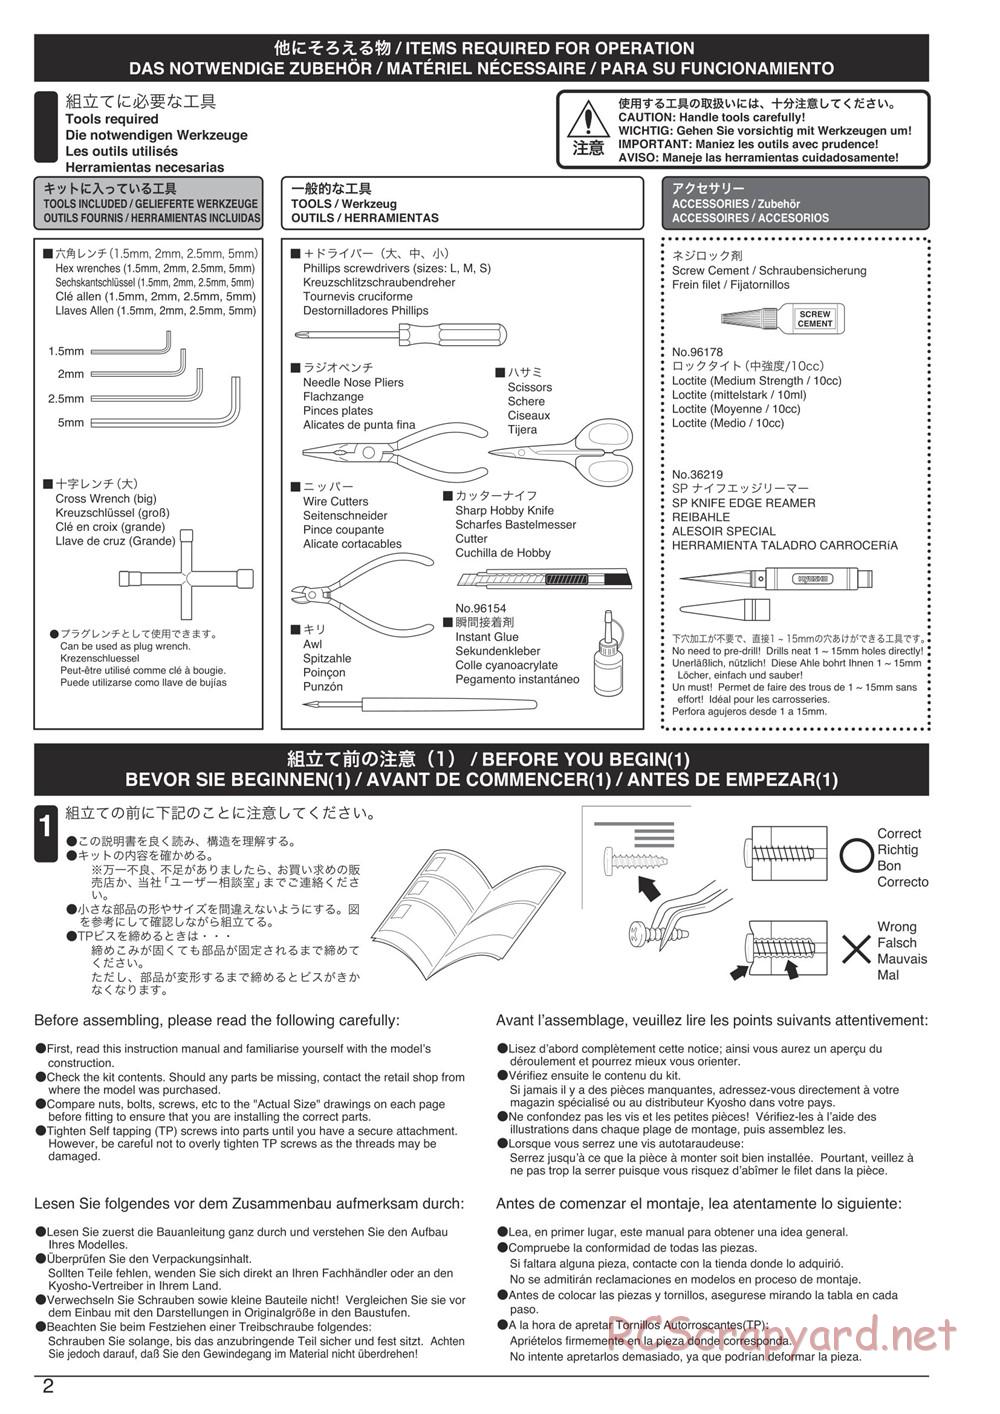 Kyosho - DMT - Manual - Page 2